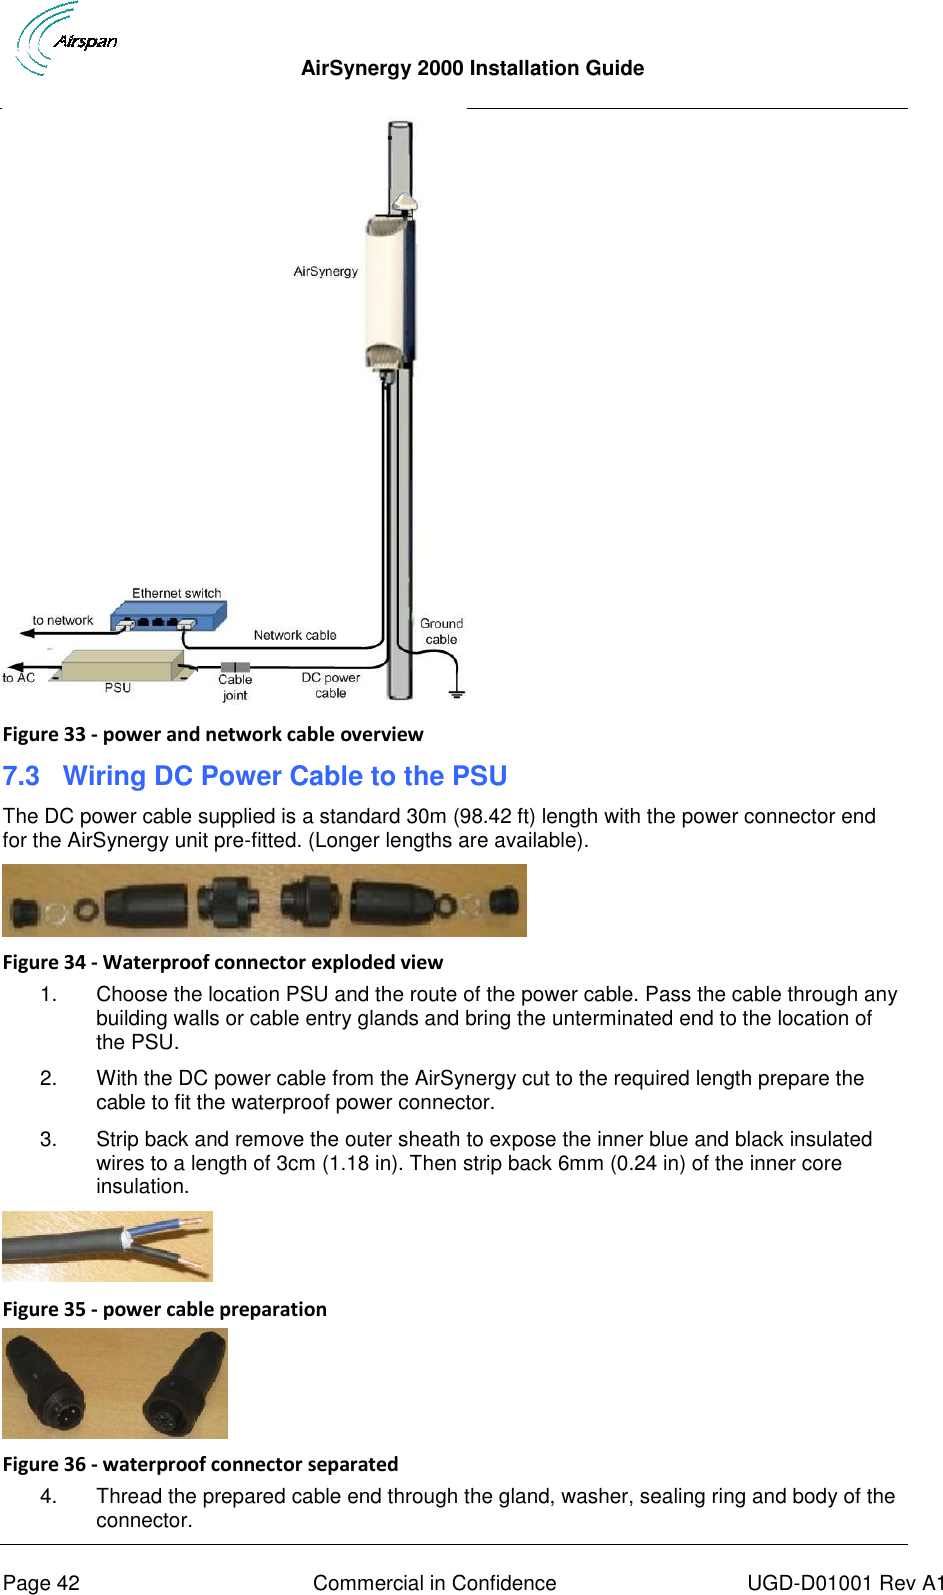  AirSynergy 2000 Installation Guide     Page 42  Commercial in Confidence  UGD-D01001 Rev A1  Figure 33 - power and network cable overview 7.3 Wiring DC Power Cable to the PSU The DC power cable supplied is a standard 30m (98.42 ft) length with the power connector end for the AirSynergy unit pre-fitted. (Longer lengths are available).   Figure 34 - Waterproof connector exploded view 1.  Choose the location PSU and the route of the power cable. Pass the cable through any building walls or cable entry glands and bring the unterminated end to the location of the PSU. 2.  With the DC power cable from the AirSynergy cut to the required length prepare the cable to fit the waterproof power connector.  3.  Strip back and remove the outer sheath to expose the inner blue and black insulated wires to a length of 3cm (1.18 in). Then strip back 6mm (0.24 in) of the inner core insulation.  Figure 35 - power cable preparation  Figure 36 - waterproof connector separated 4.  Thread the prepared cable end through the gland, washer, sealing ring and body of the connector. 